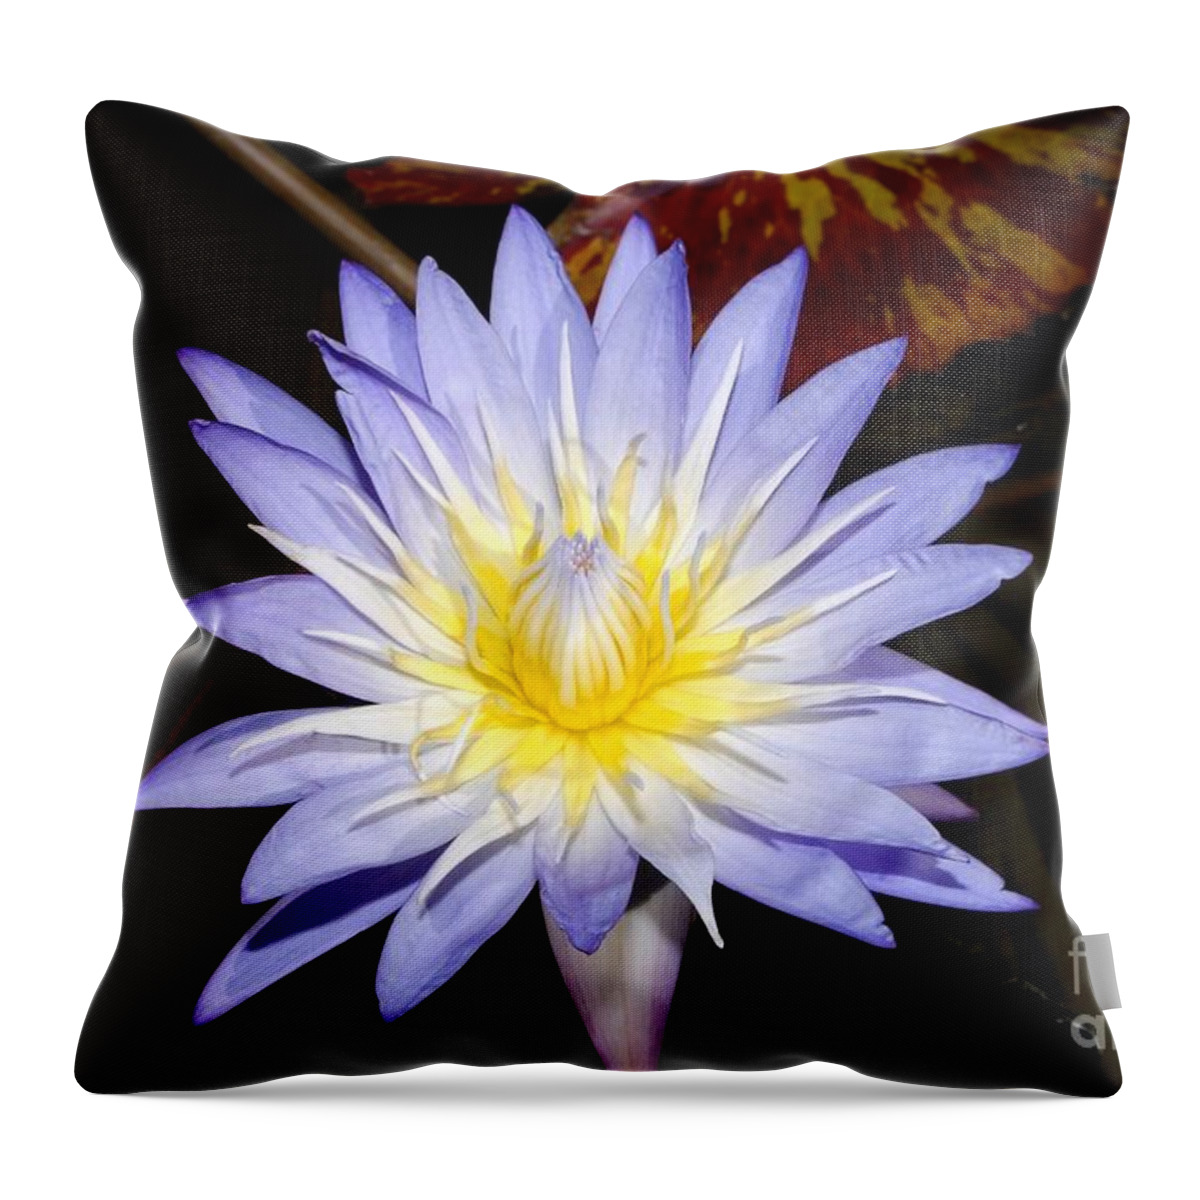 Lily Throw Pillow featuring the photograph Brilliant Beauty by David Lee Thompson